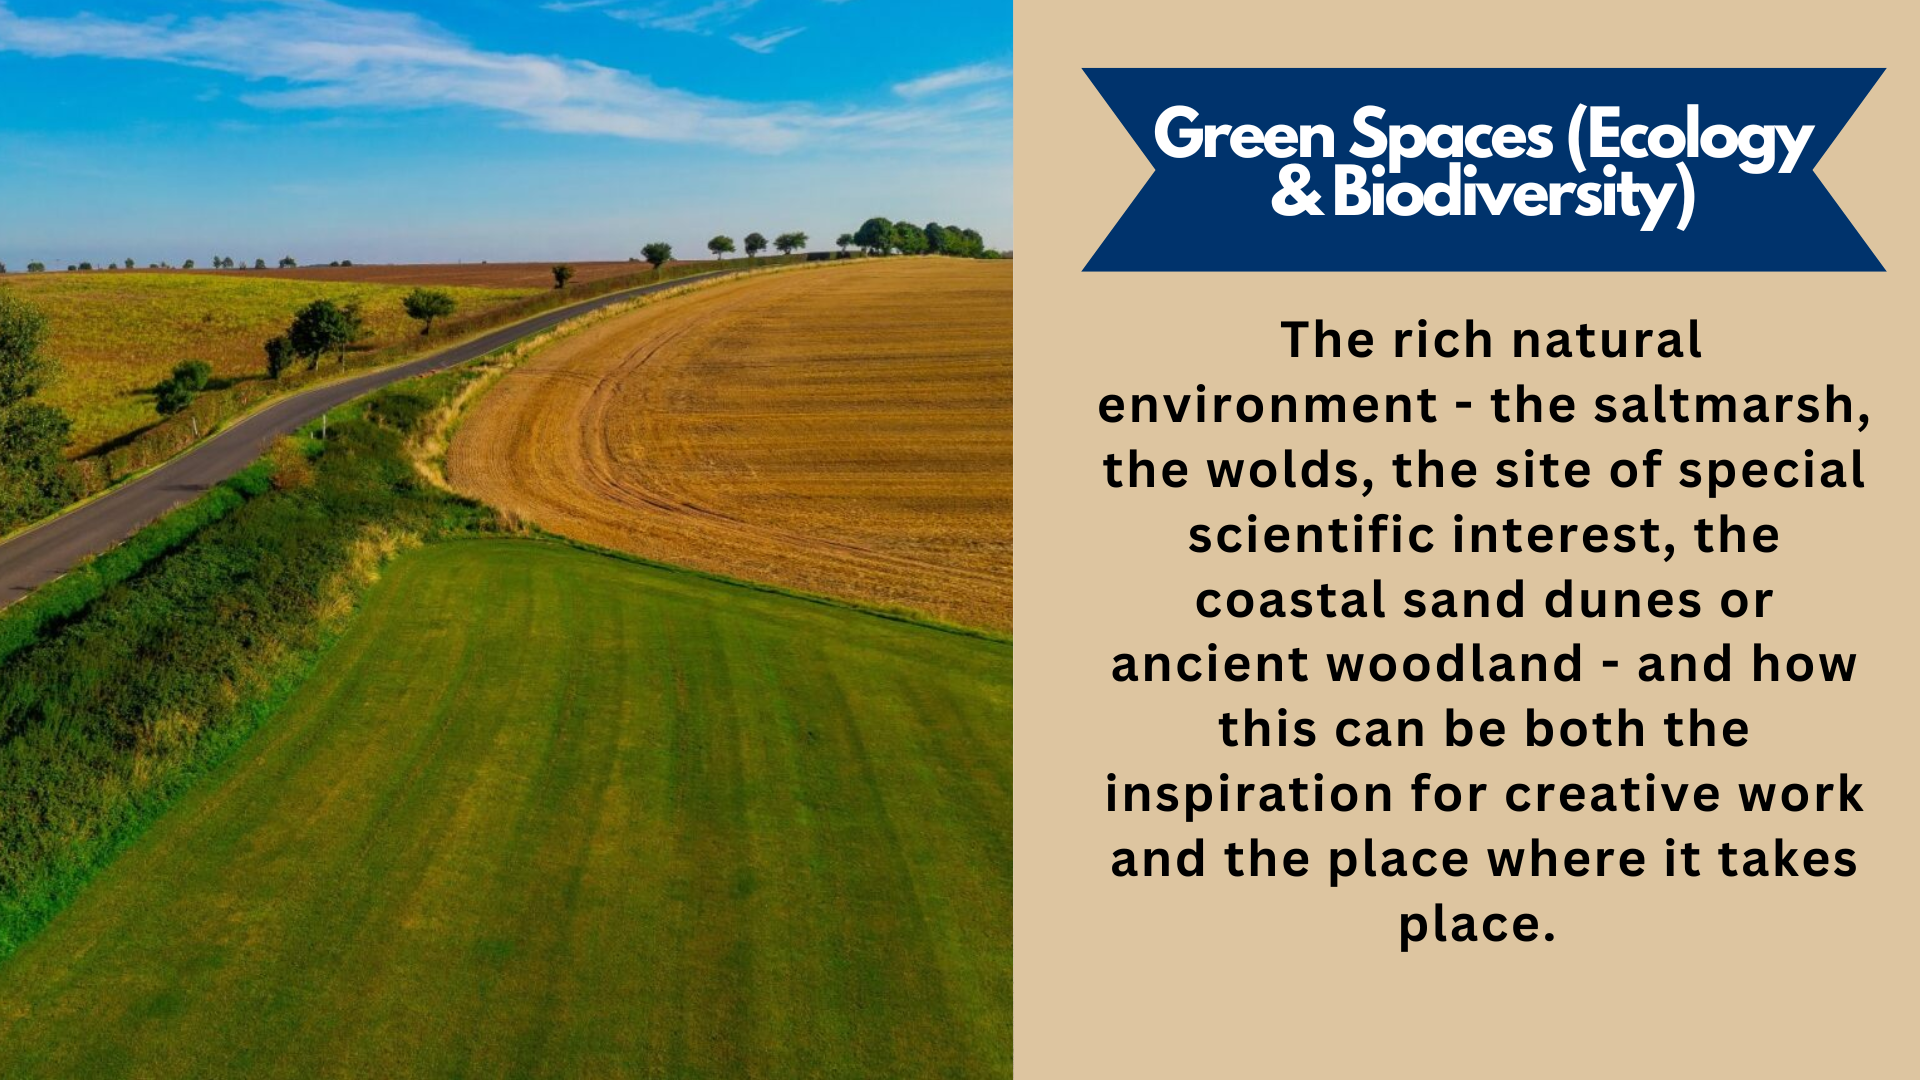 Green Spaces (Ecology & Biodiversity). The rich natural environment - the saltmarsh, the wolds, the site of special scientific interest, the coastal sand dunes or ancient woodland - and how this can be both the inspiration for creative work and the place where it takes place.